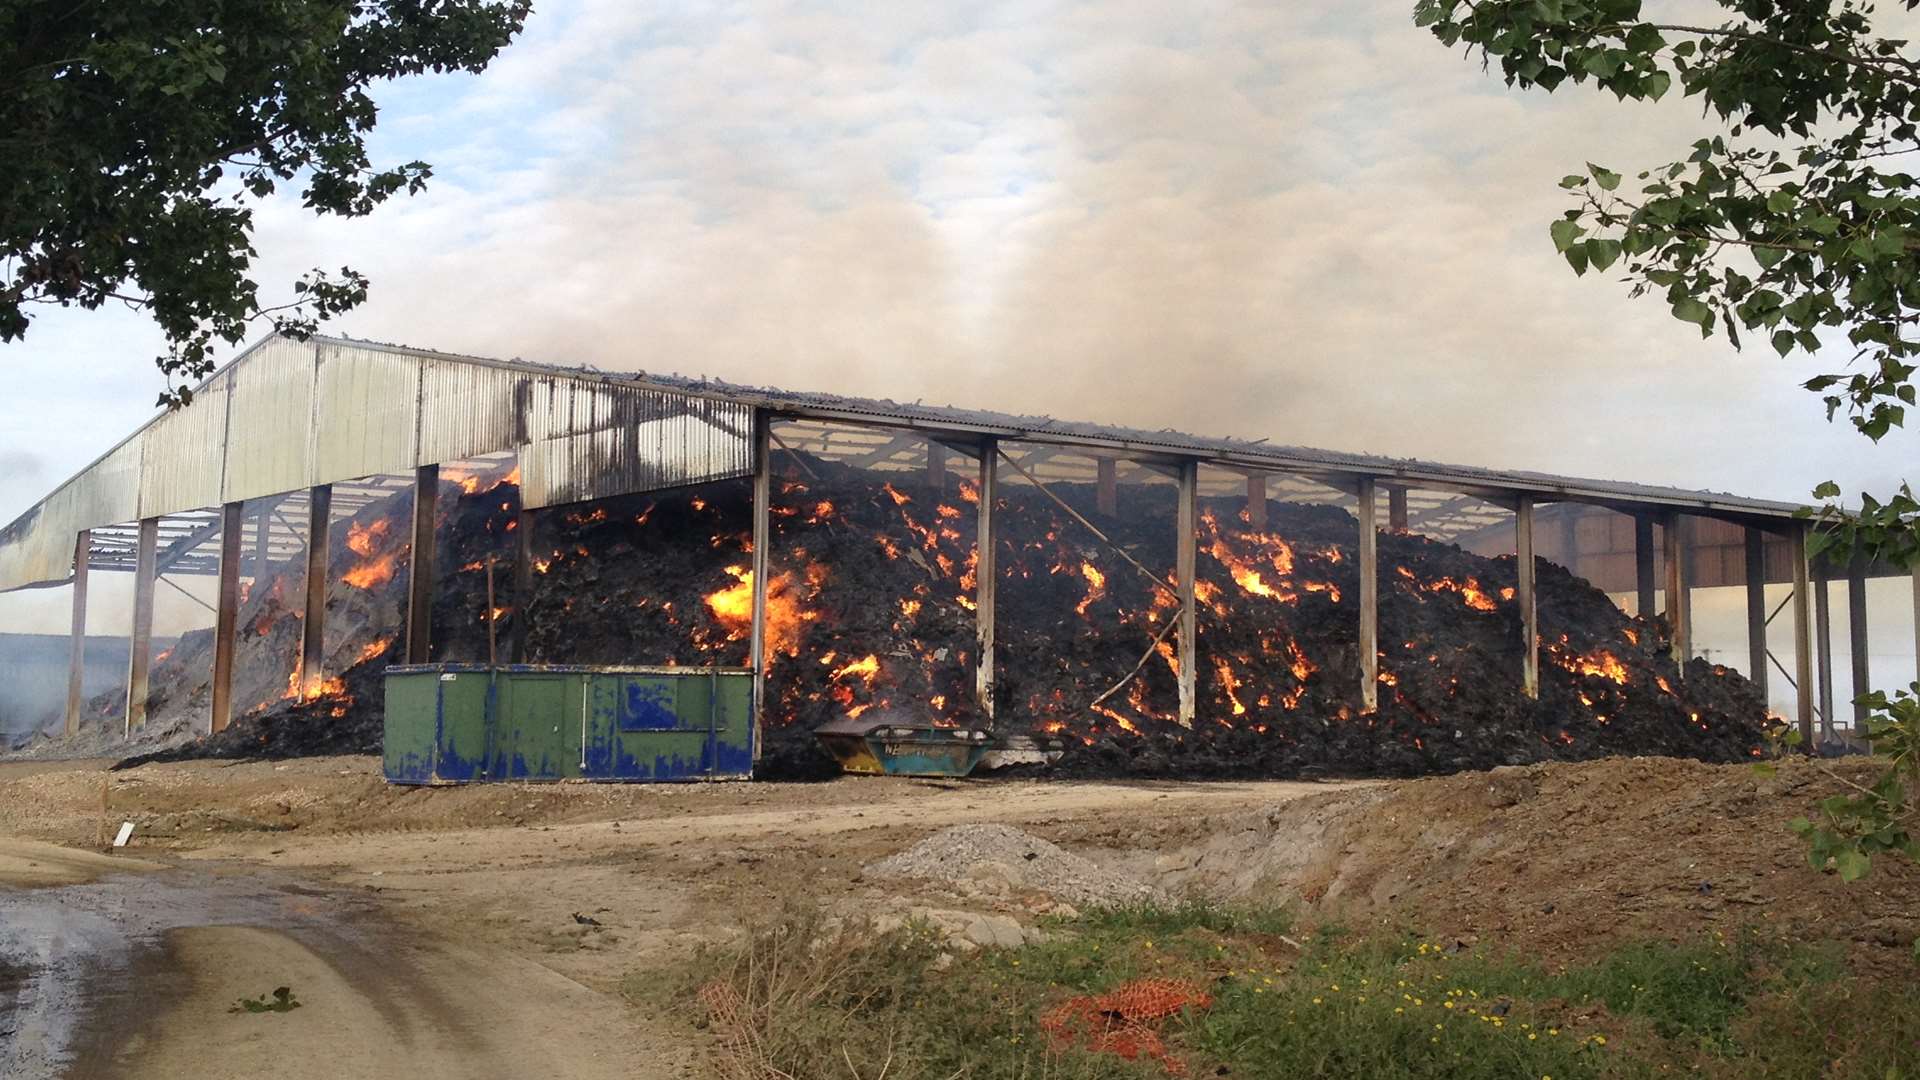 The barn blaze in Lower Road, Minster, on the Isle of Sheppey